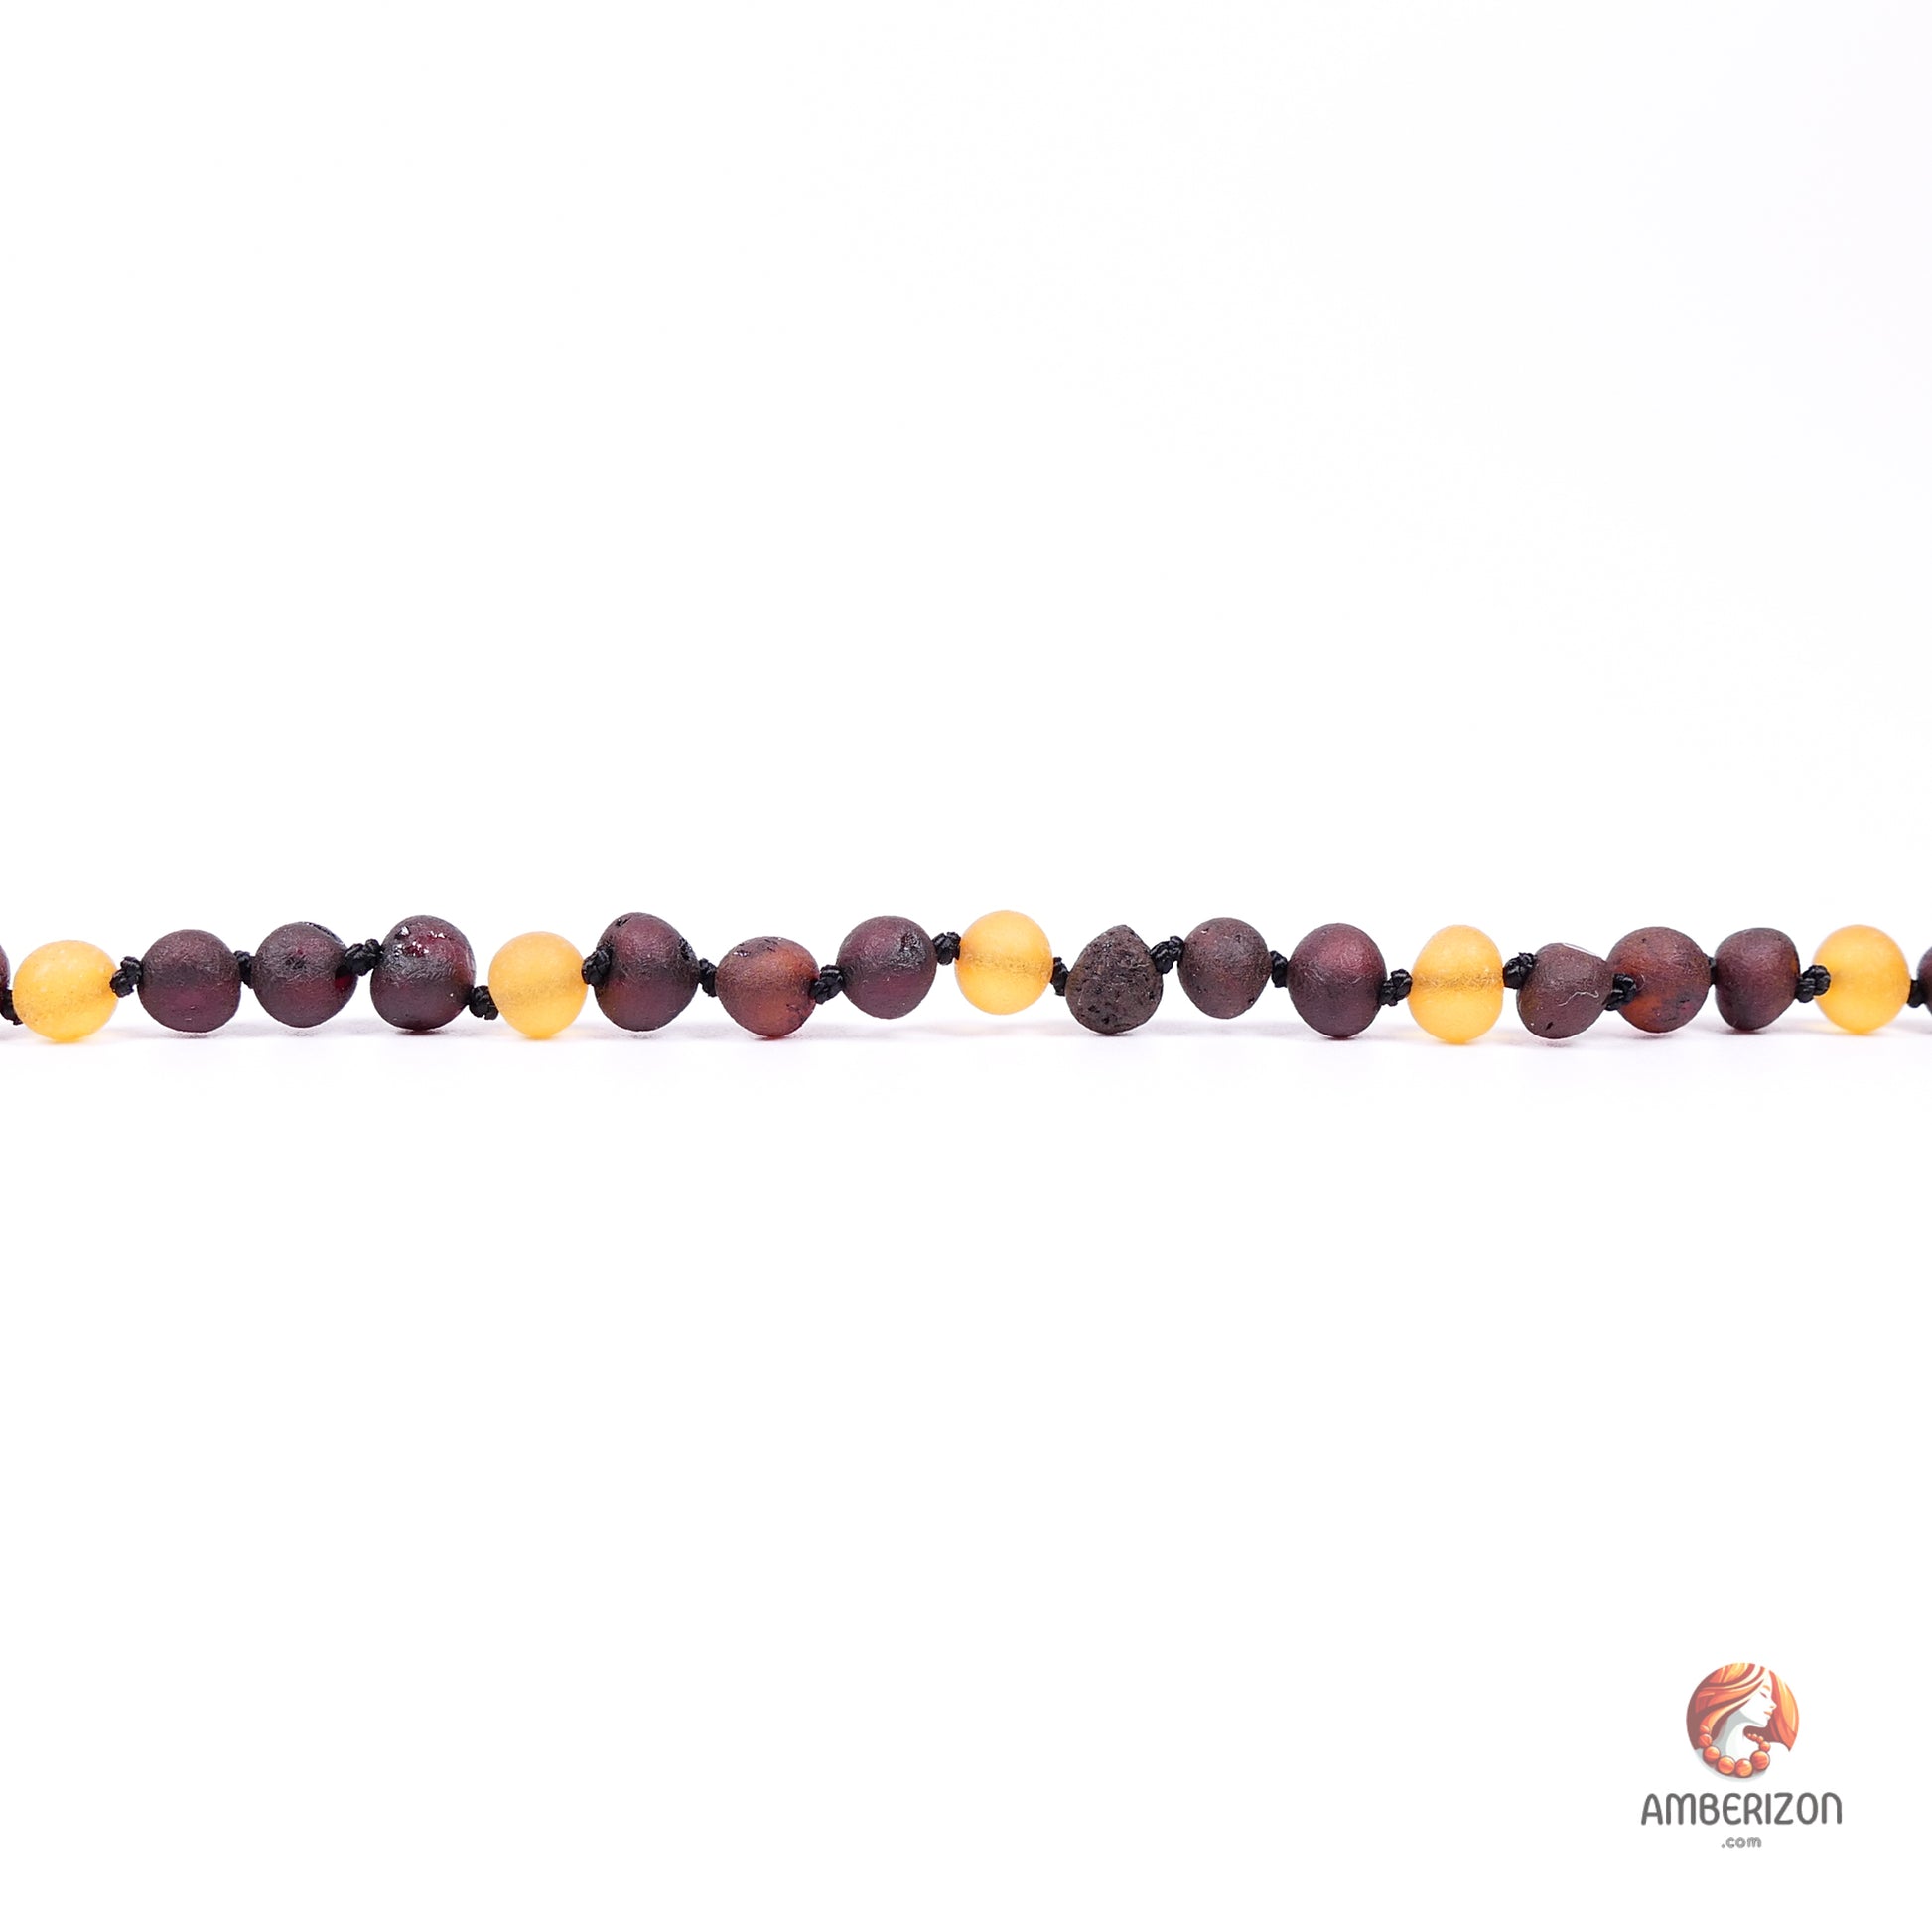 Minimalist Baltic Amber Necklace - Cherry and Honey Hues